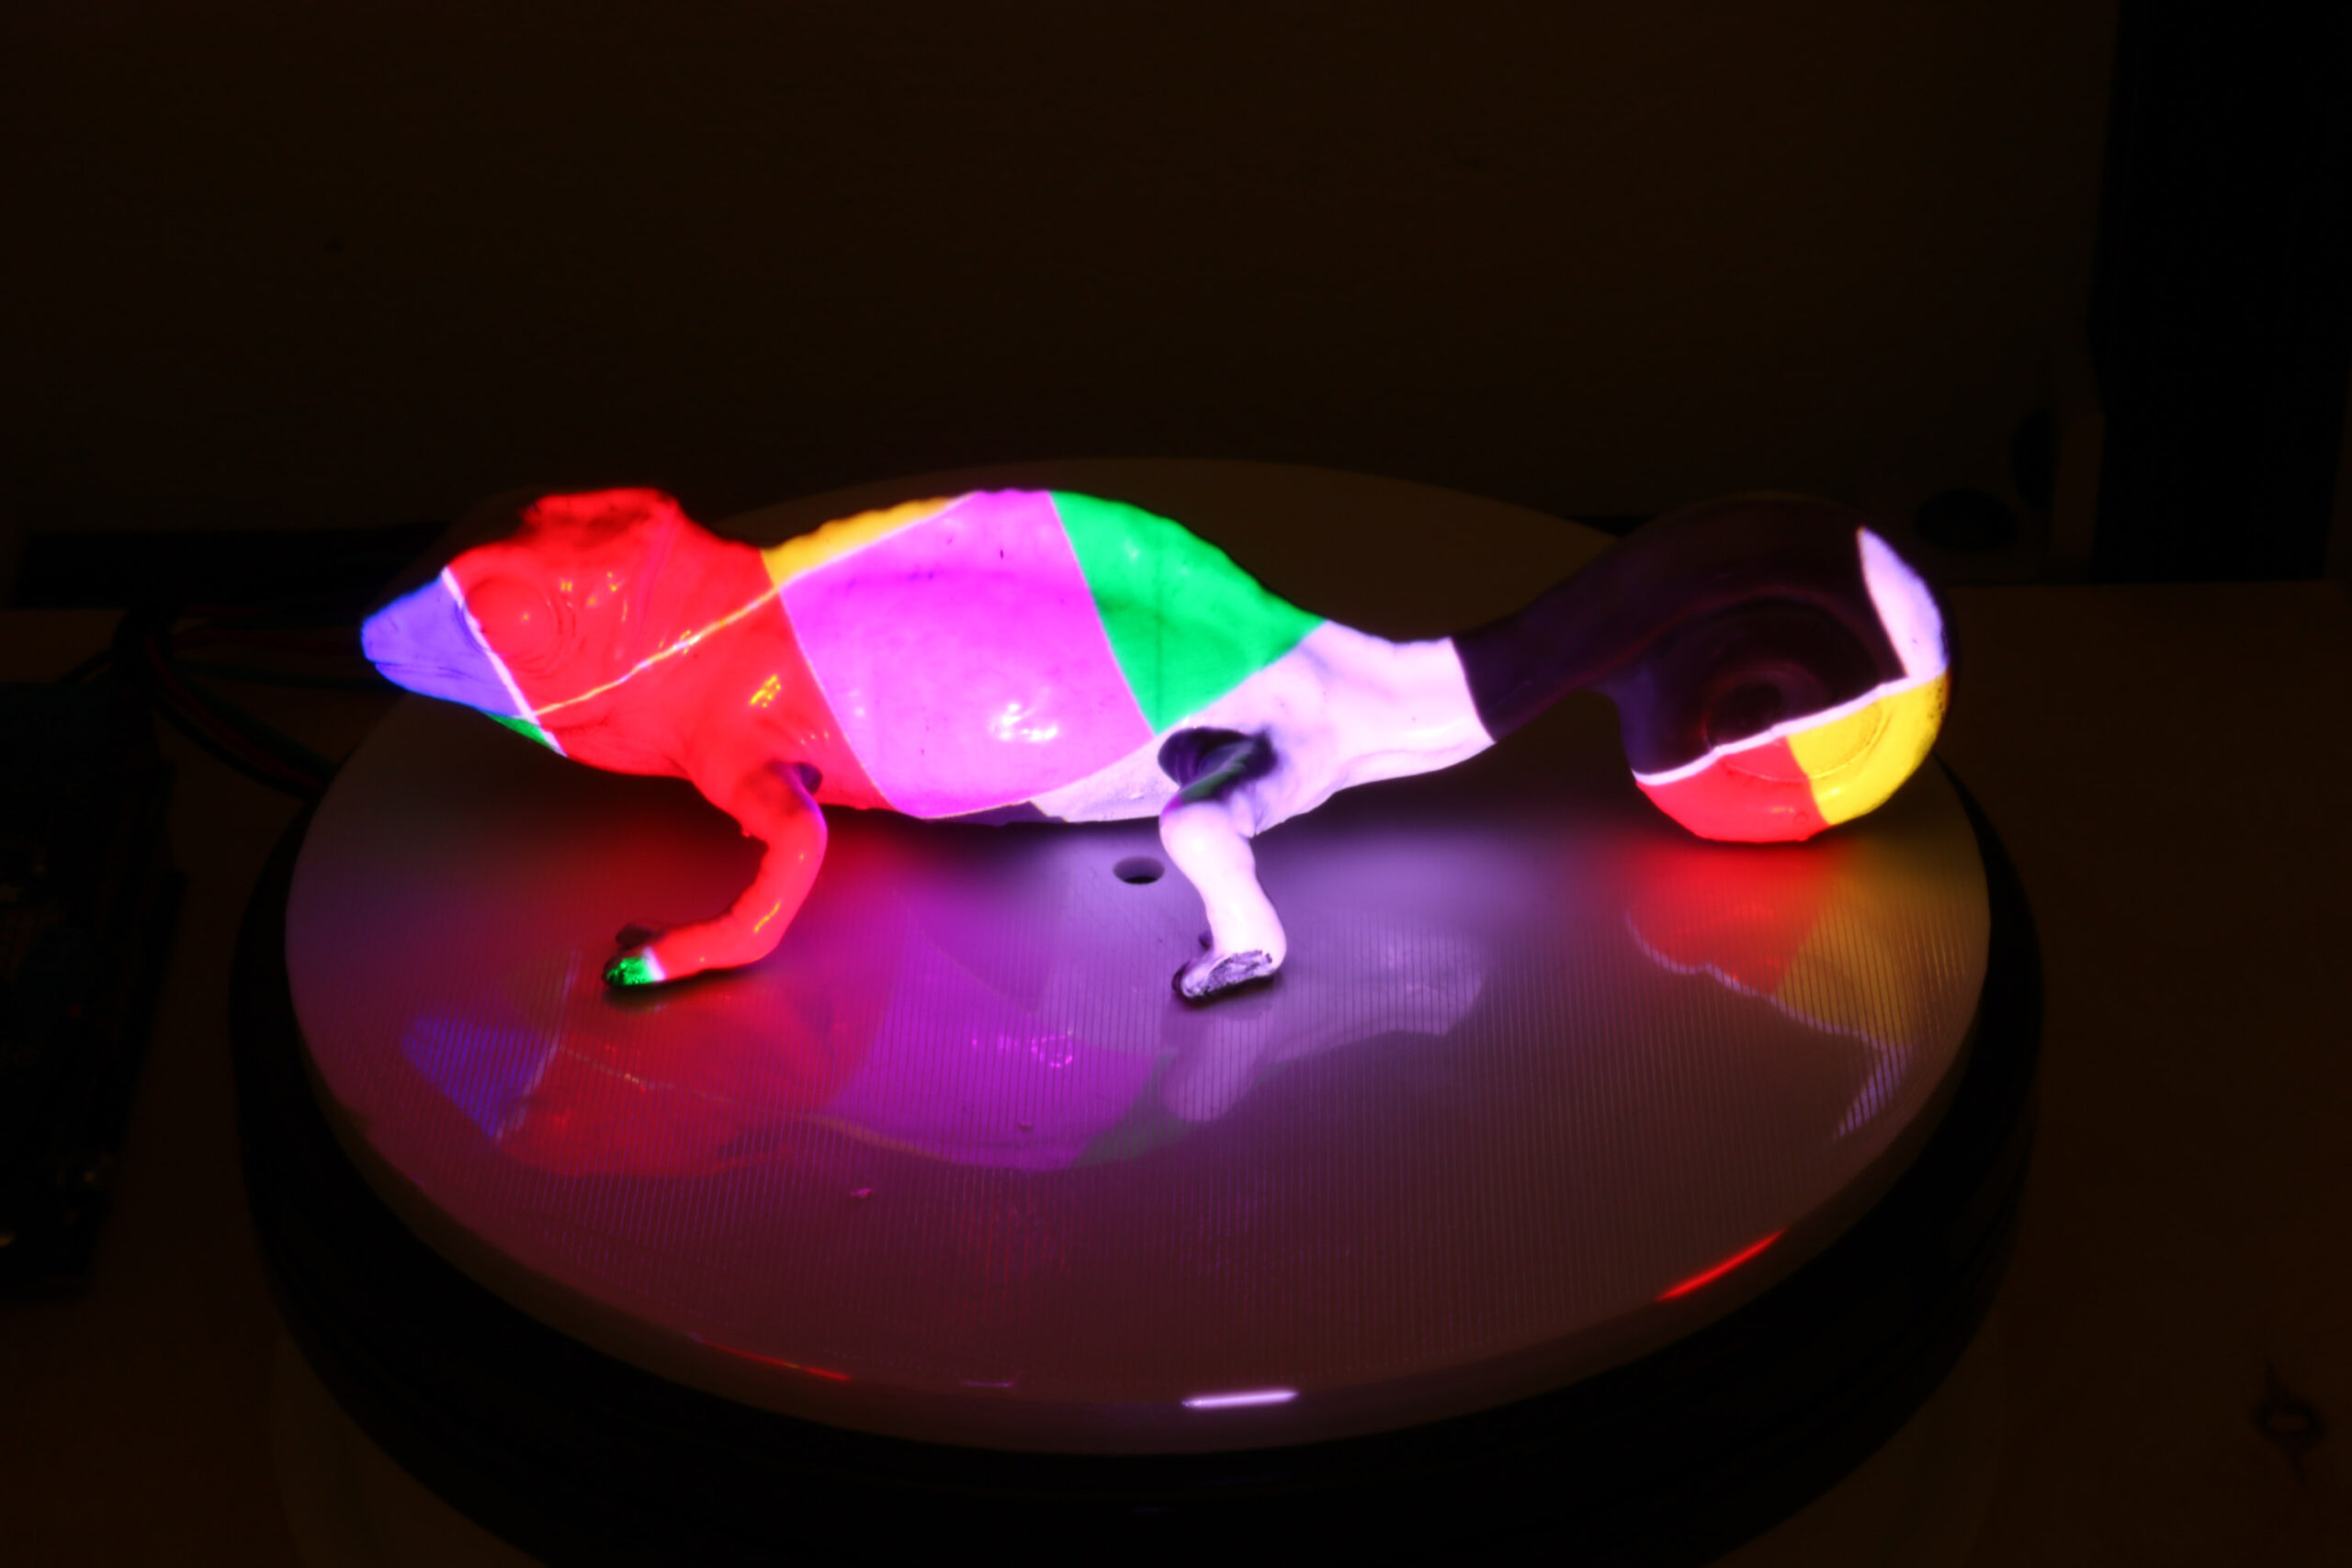 chameleon model lit up with colored sections